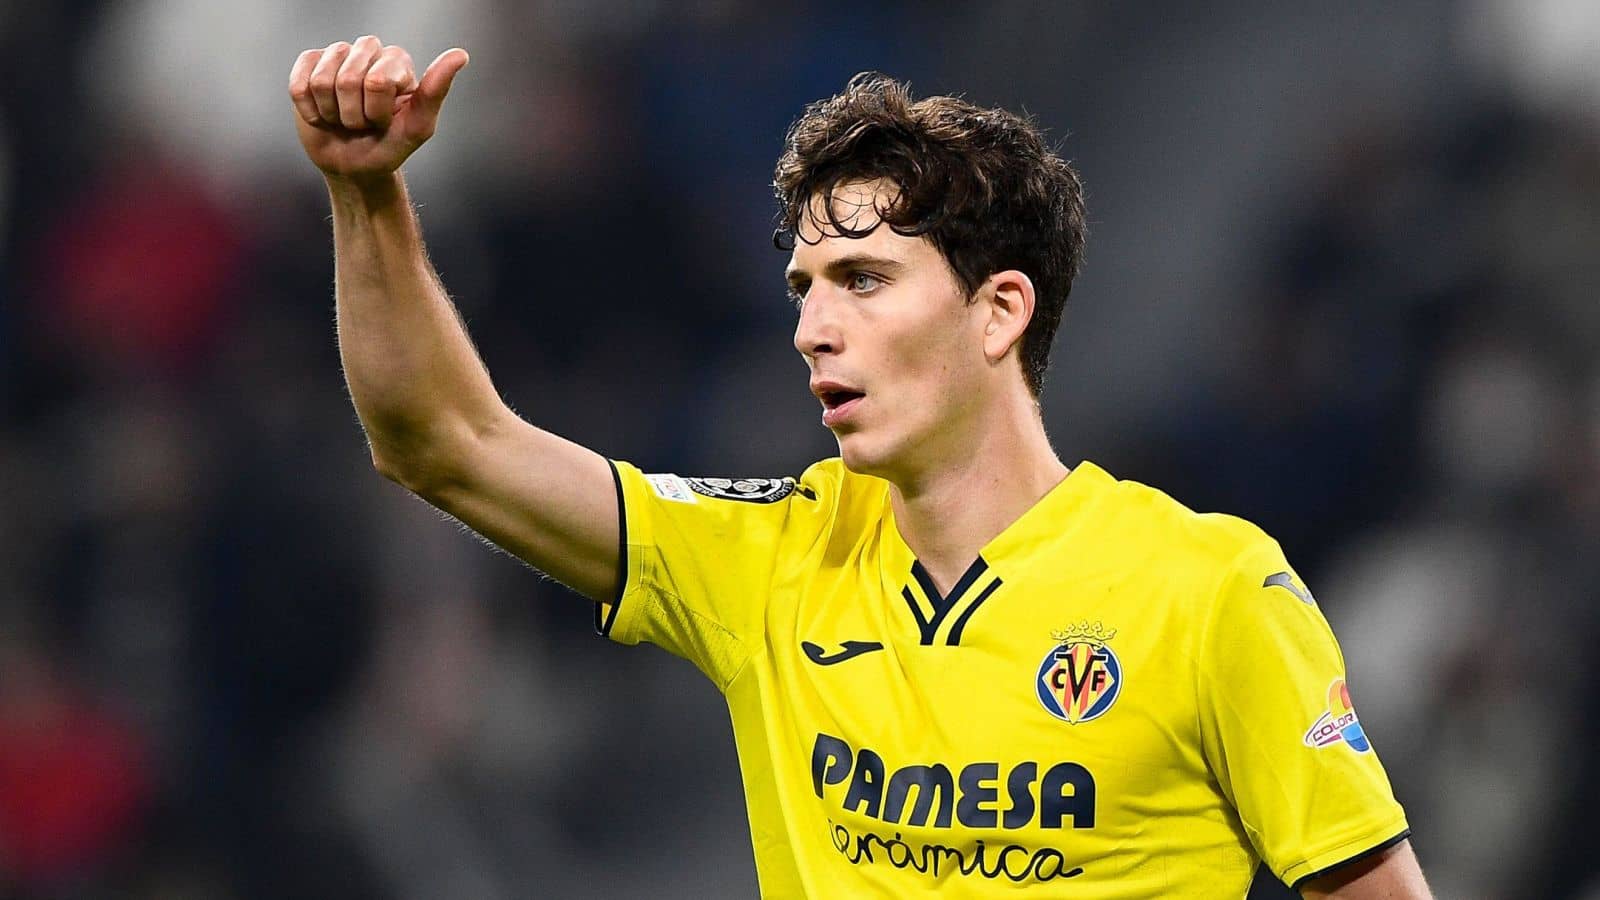 Market opportunity at Villarreal CF to replace Pau Torres
	
